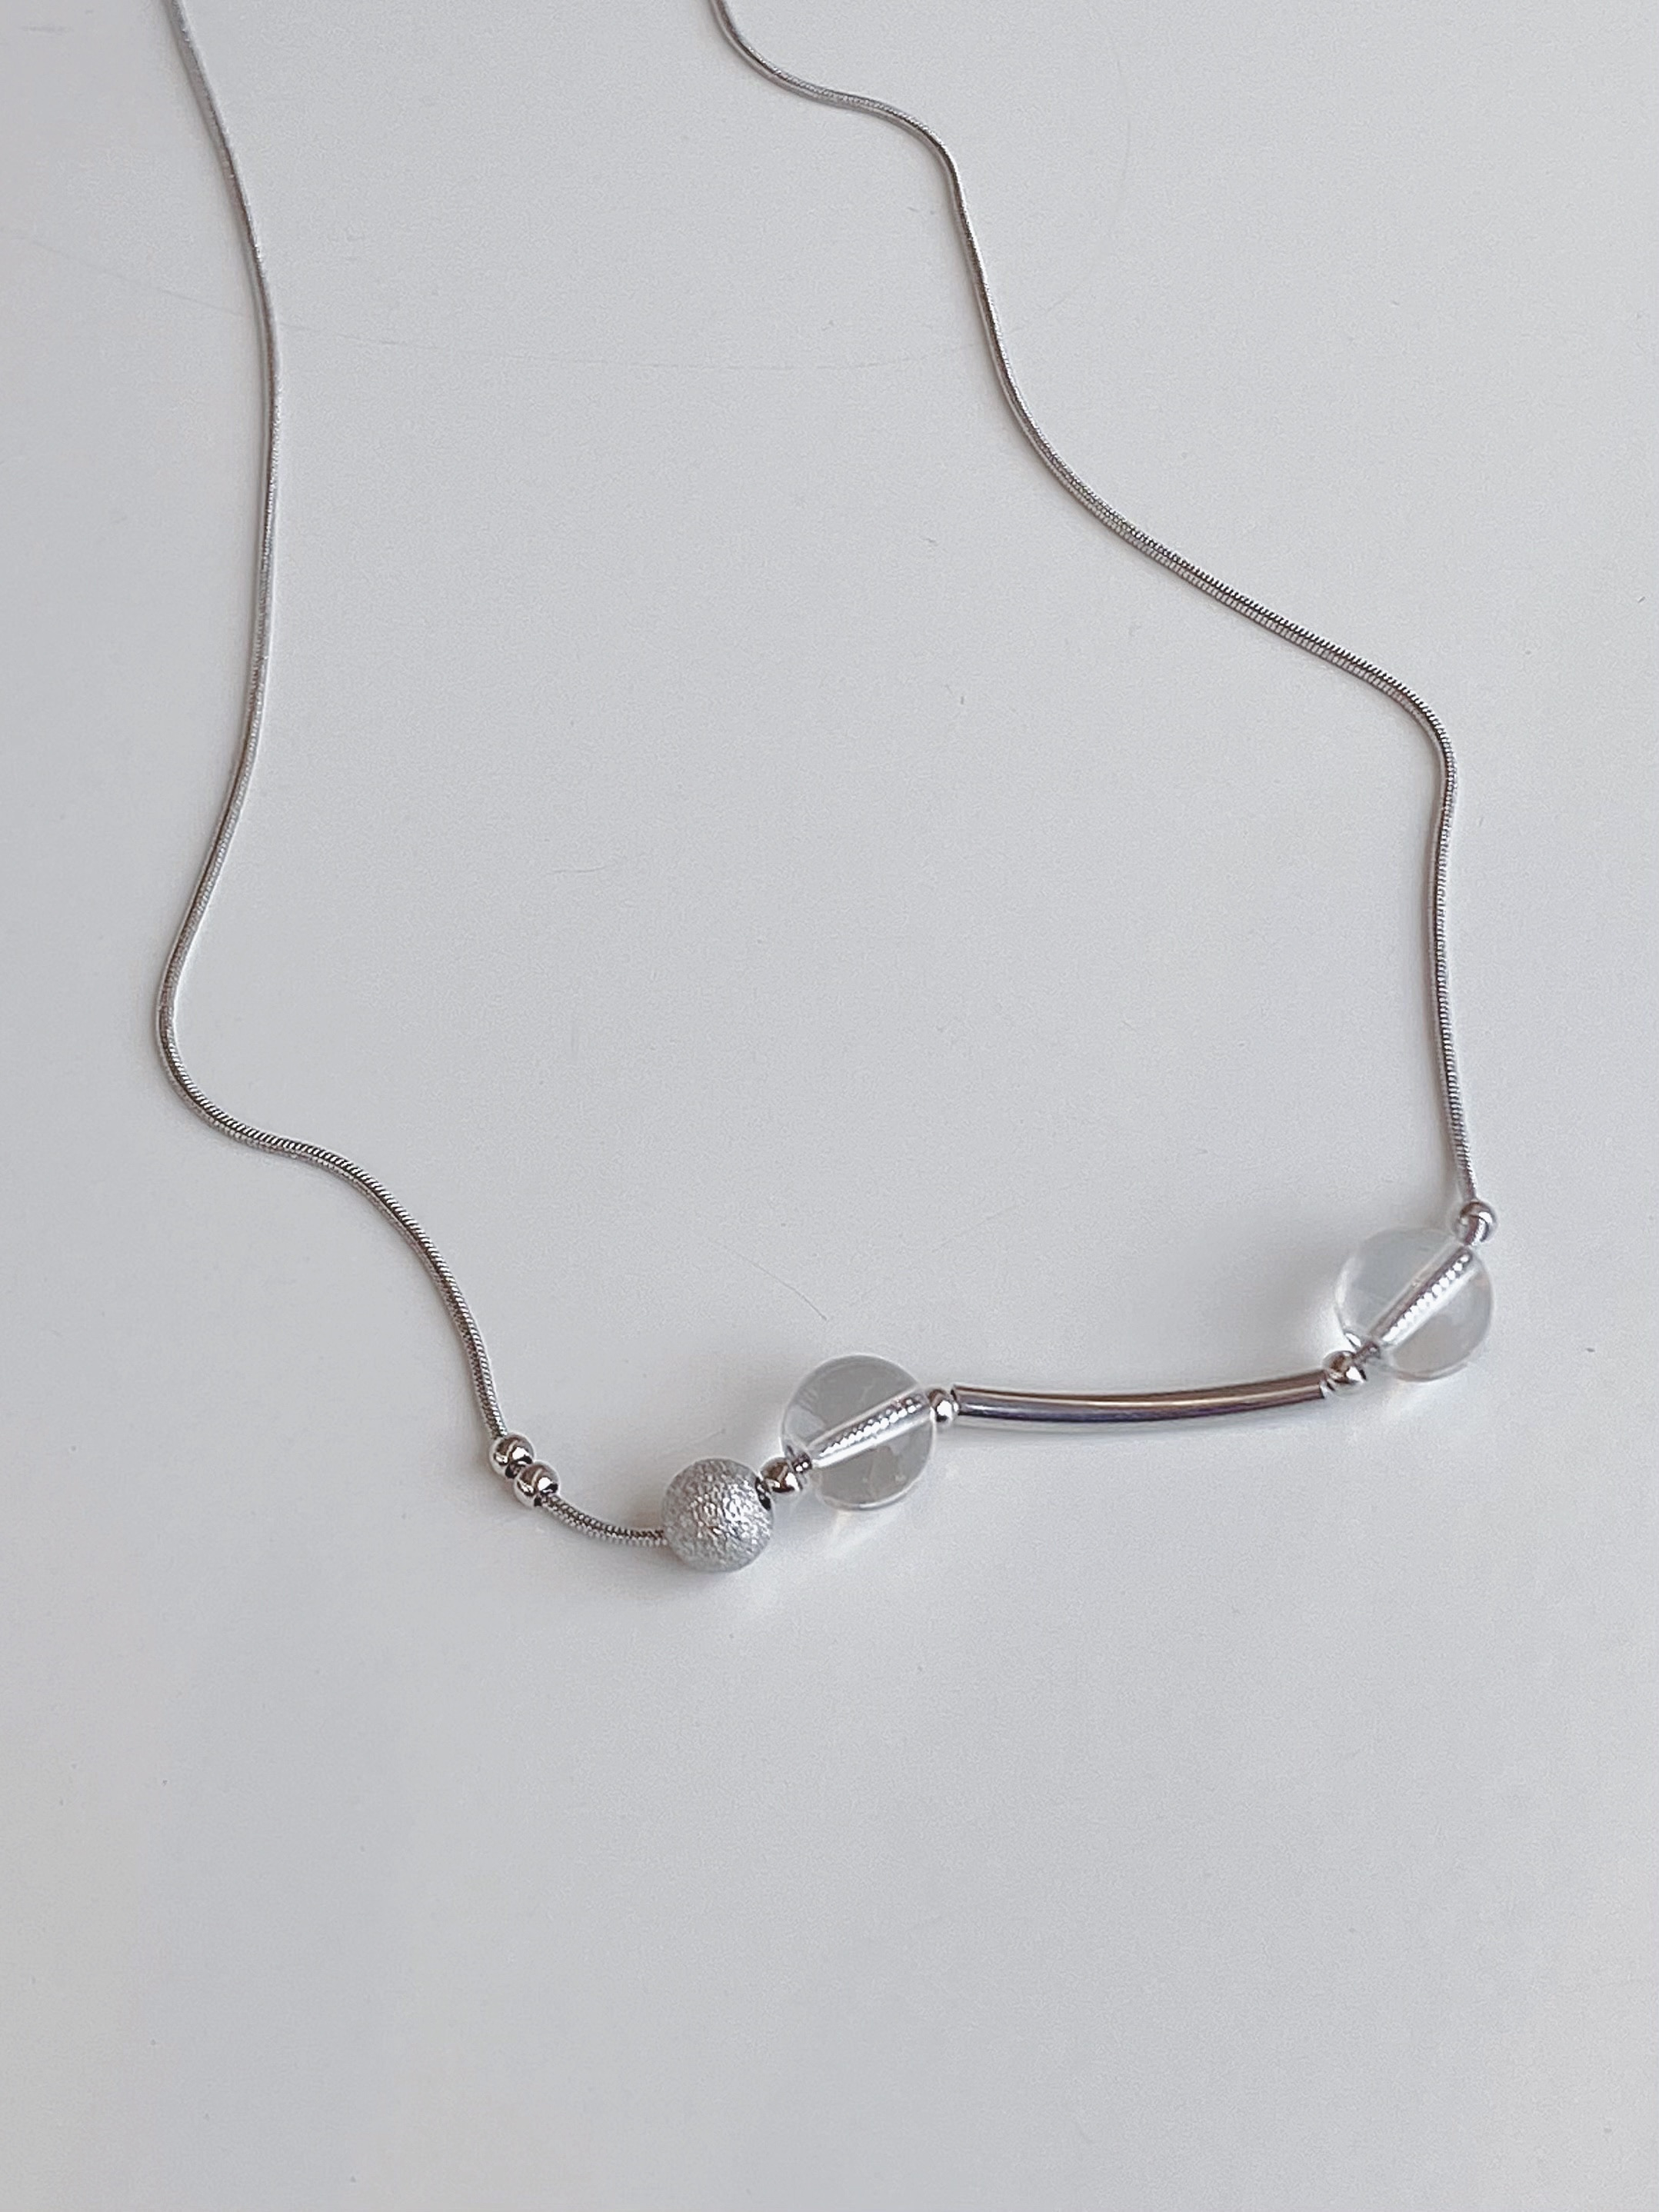 [Made outsquare] Aeonian bar necklace